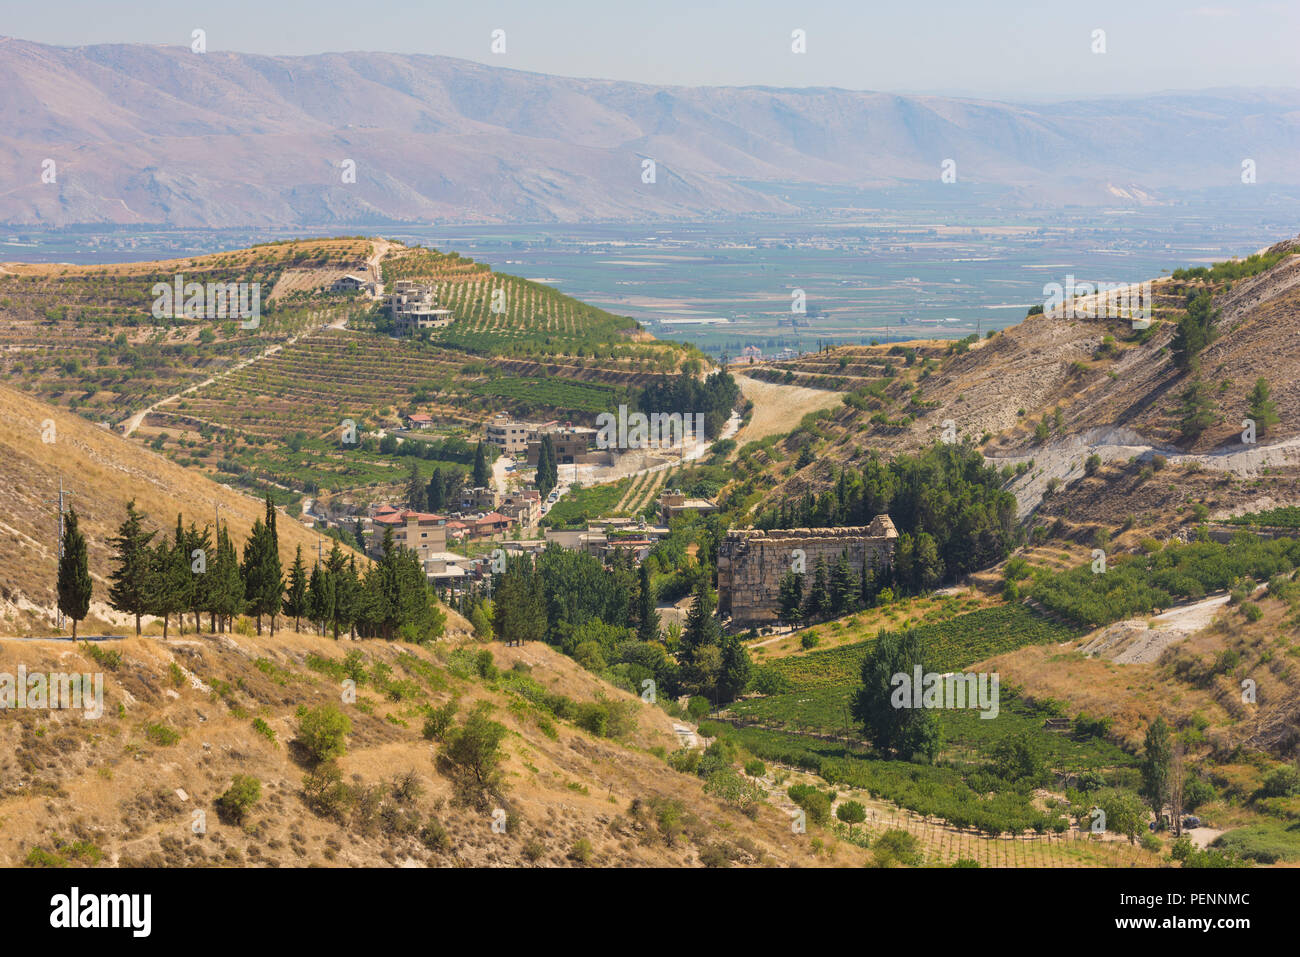 Panorama of the Bekaa Valley landscape with the Niha Roman temple, vineyard hills and mountains, in Zahle, Lebanon Stock Photo